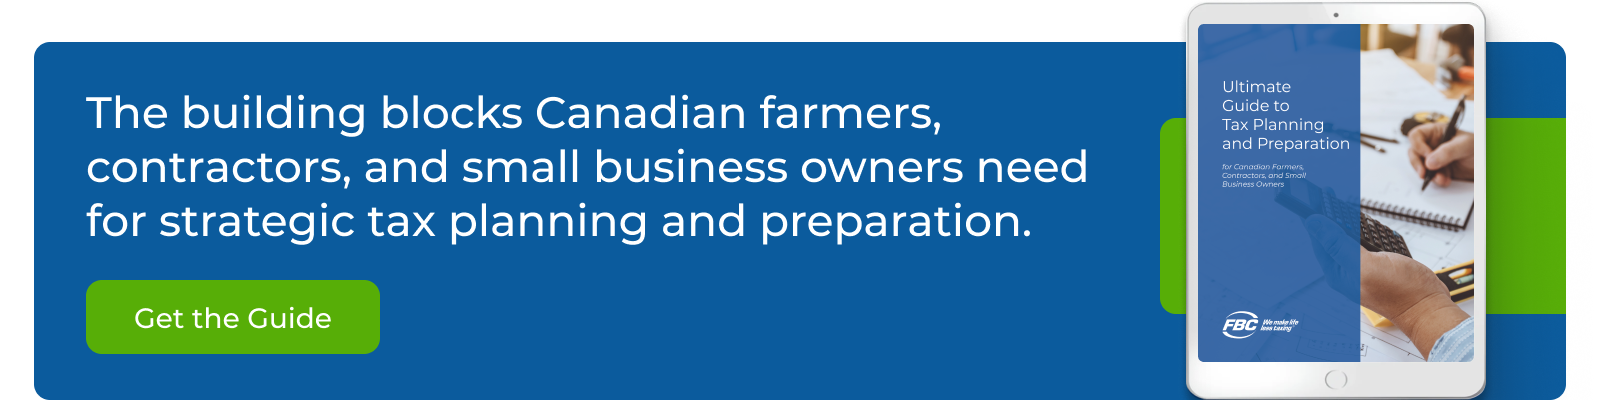 The building blocks Canadian farmers, contractors, and small business owners need for strategic tax planning and preparation. Get the guide!